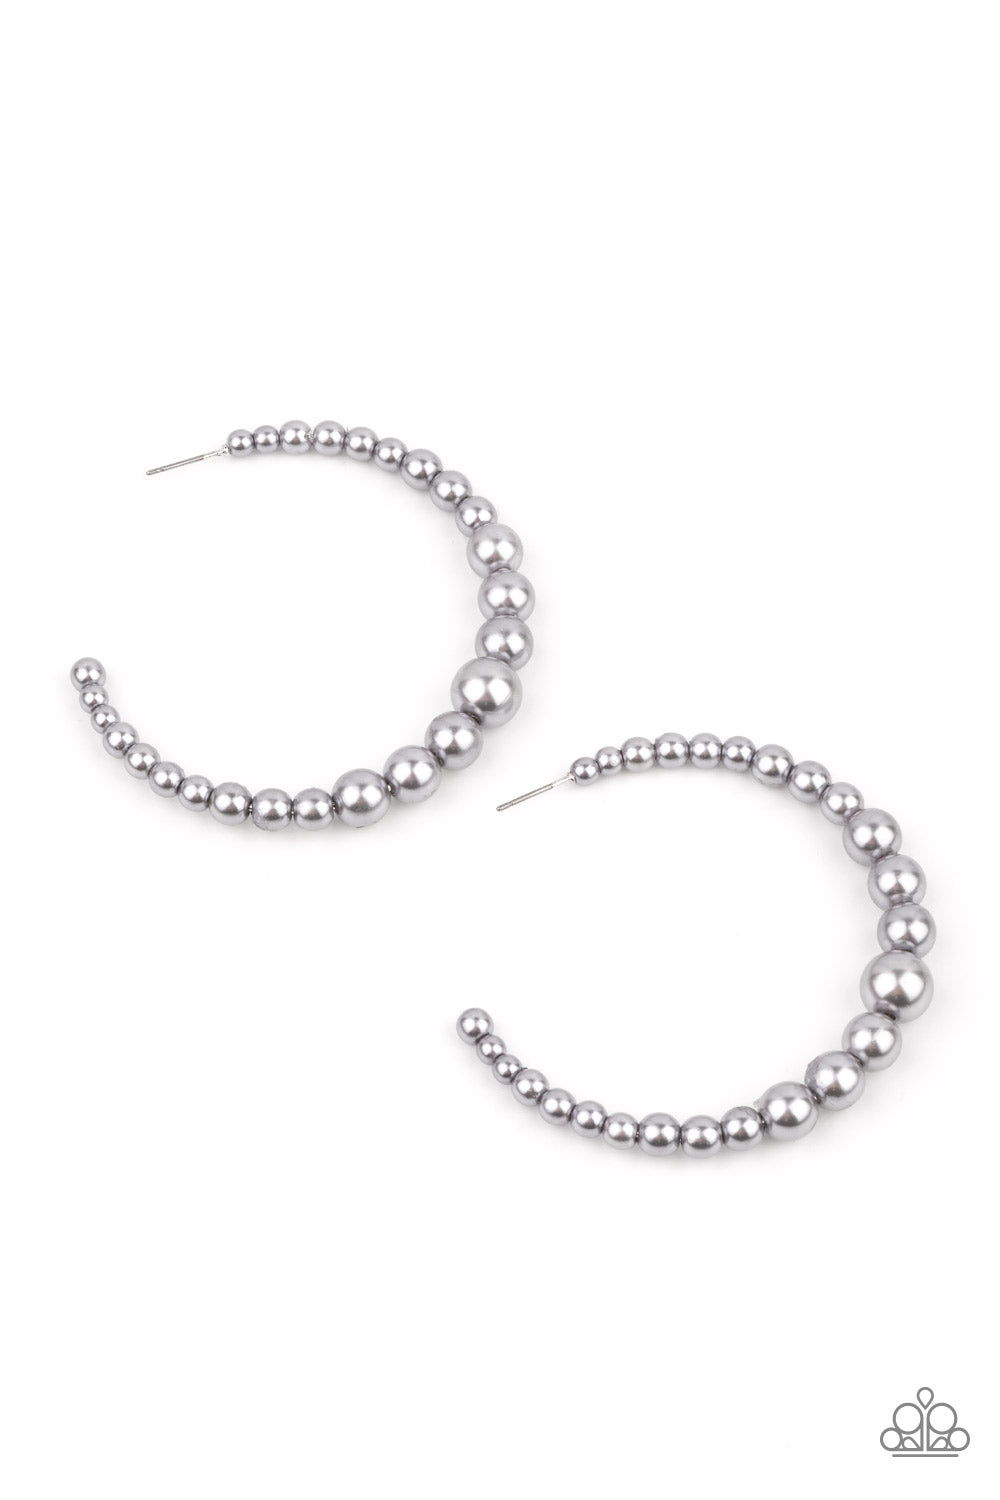 Glamour Graduate Silver Hoop Earring - Paparazzi Accessories  Gradually increasing in size at the center, a classic row of pearly silver beads are threaded along an oversized hoop for a posh finish. Earring attaches to a standard post fitting. Hoop measures approximately 2 1/4" in diameter.  All Paparazzi Accessories are lead free and nickel free!  Sold as one pair of hoop earrings.